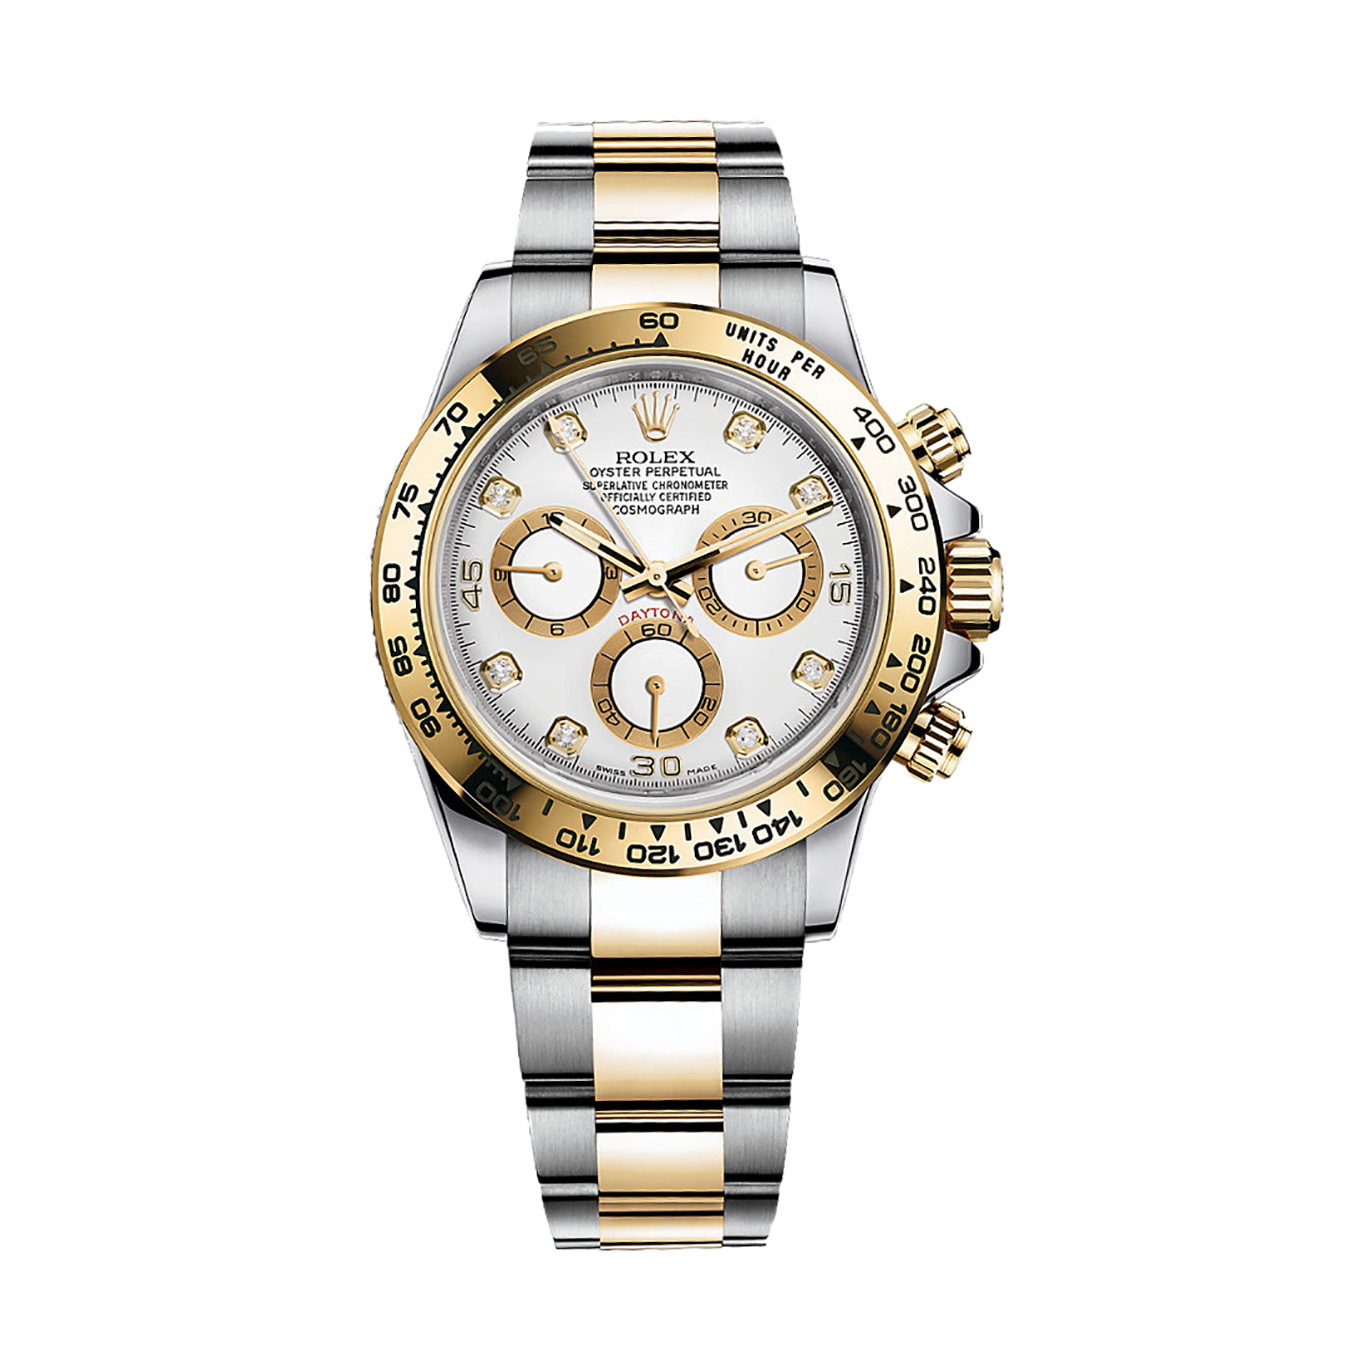 Cosmograph Daytona 116503 Gold & Stainless Steel Watch (White Set With Diamonds)